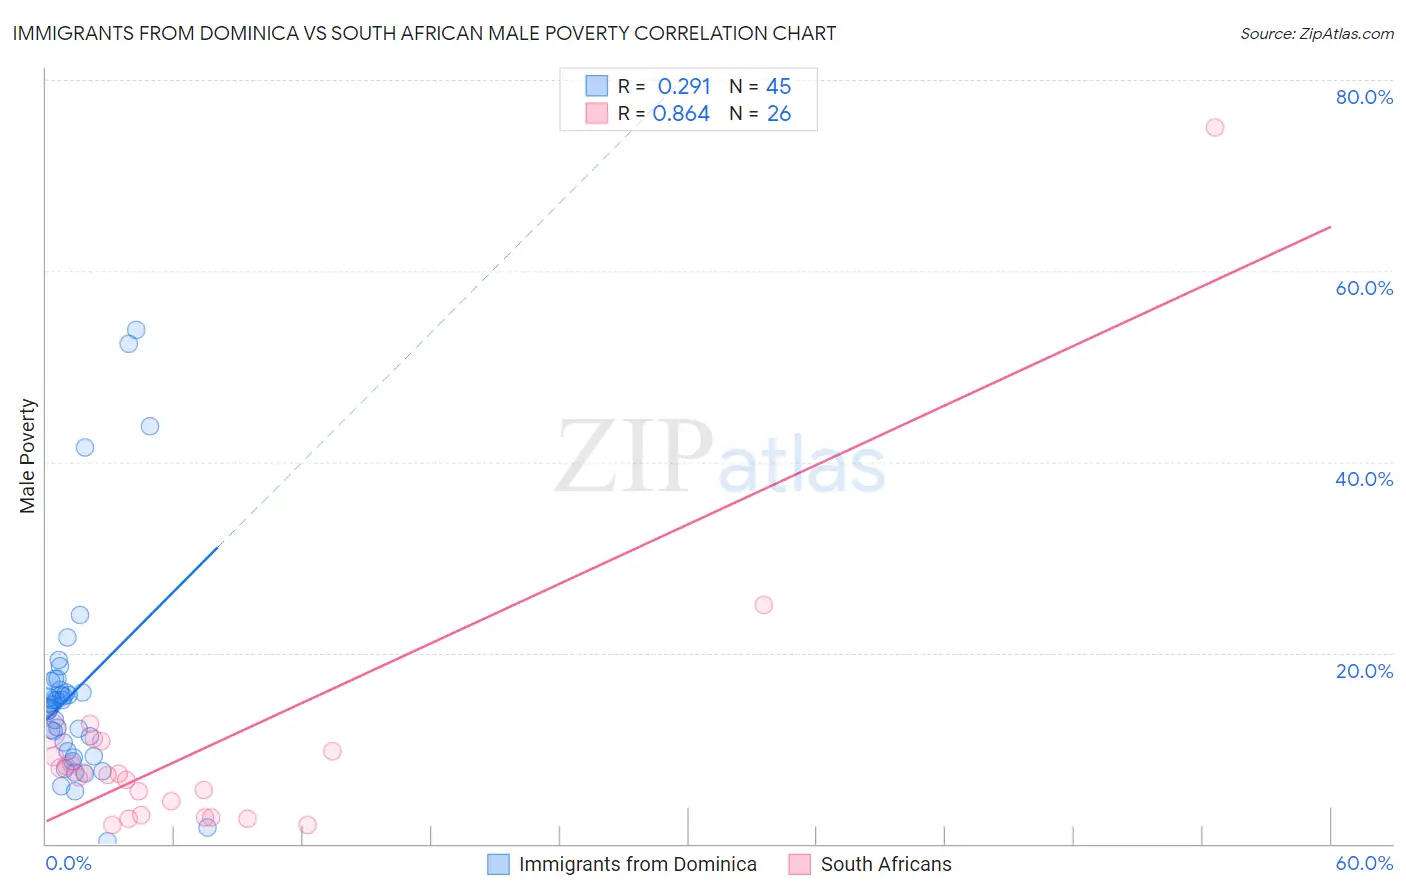 Immigrants from Dominica vs South African Male Poverty